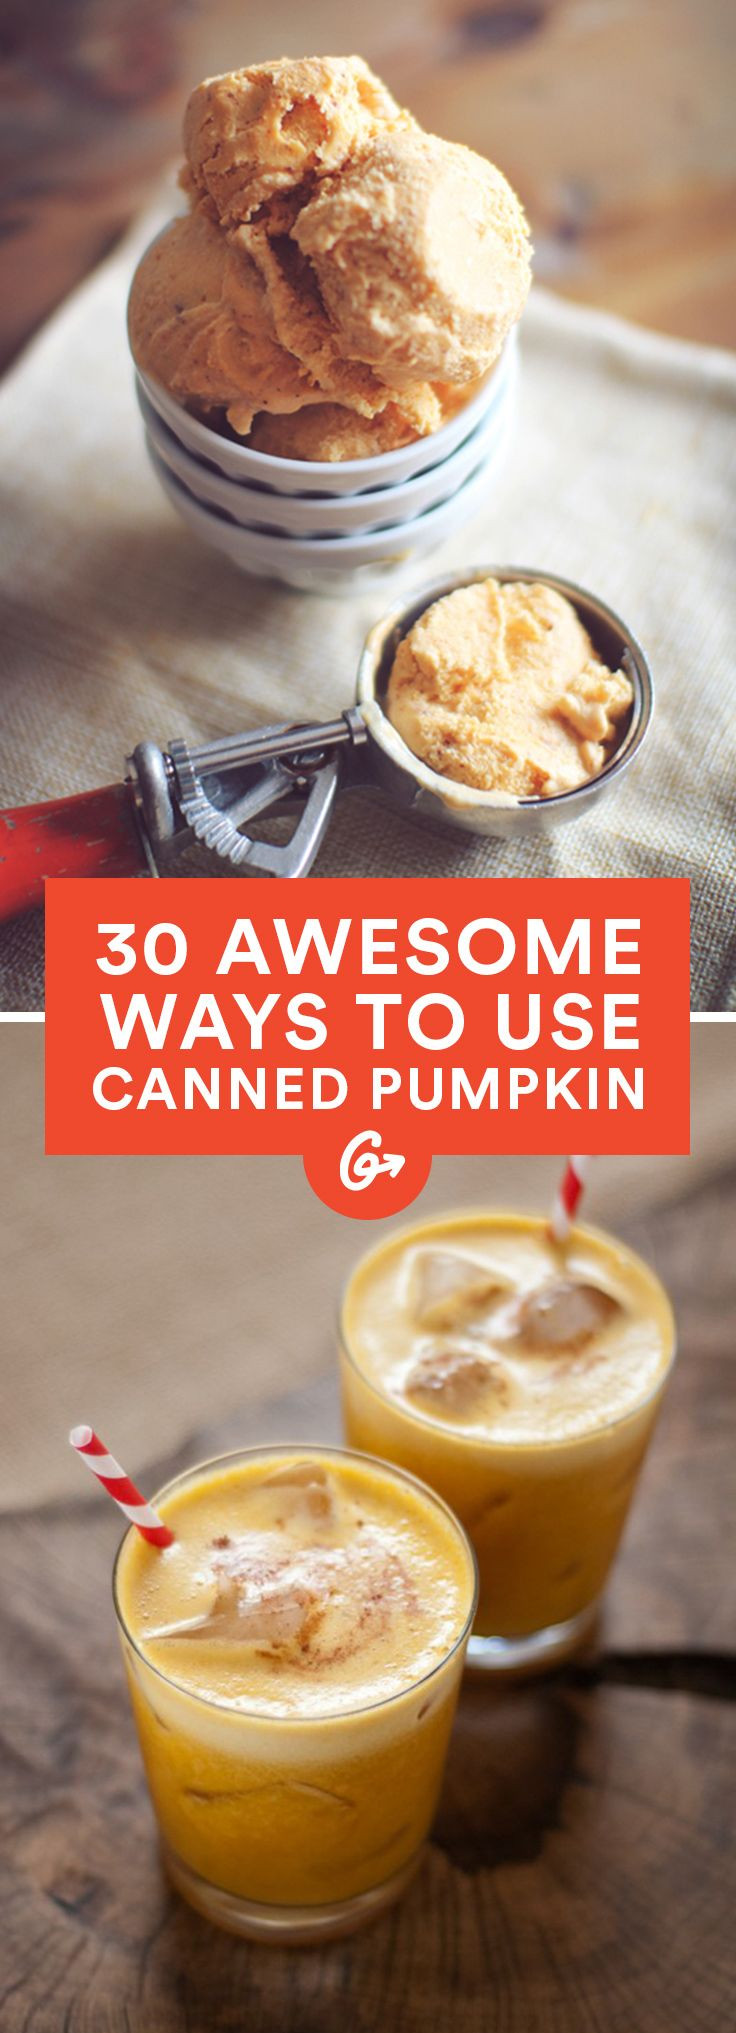 Healthy Canned Pumpkin Recipes
 100 Canned Pumpkin Recipes on Pinterest